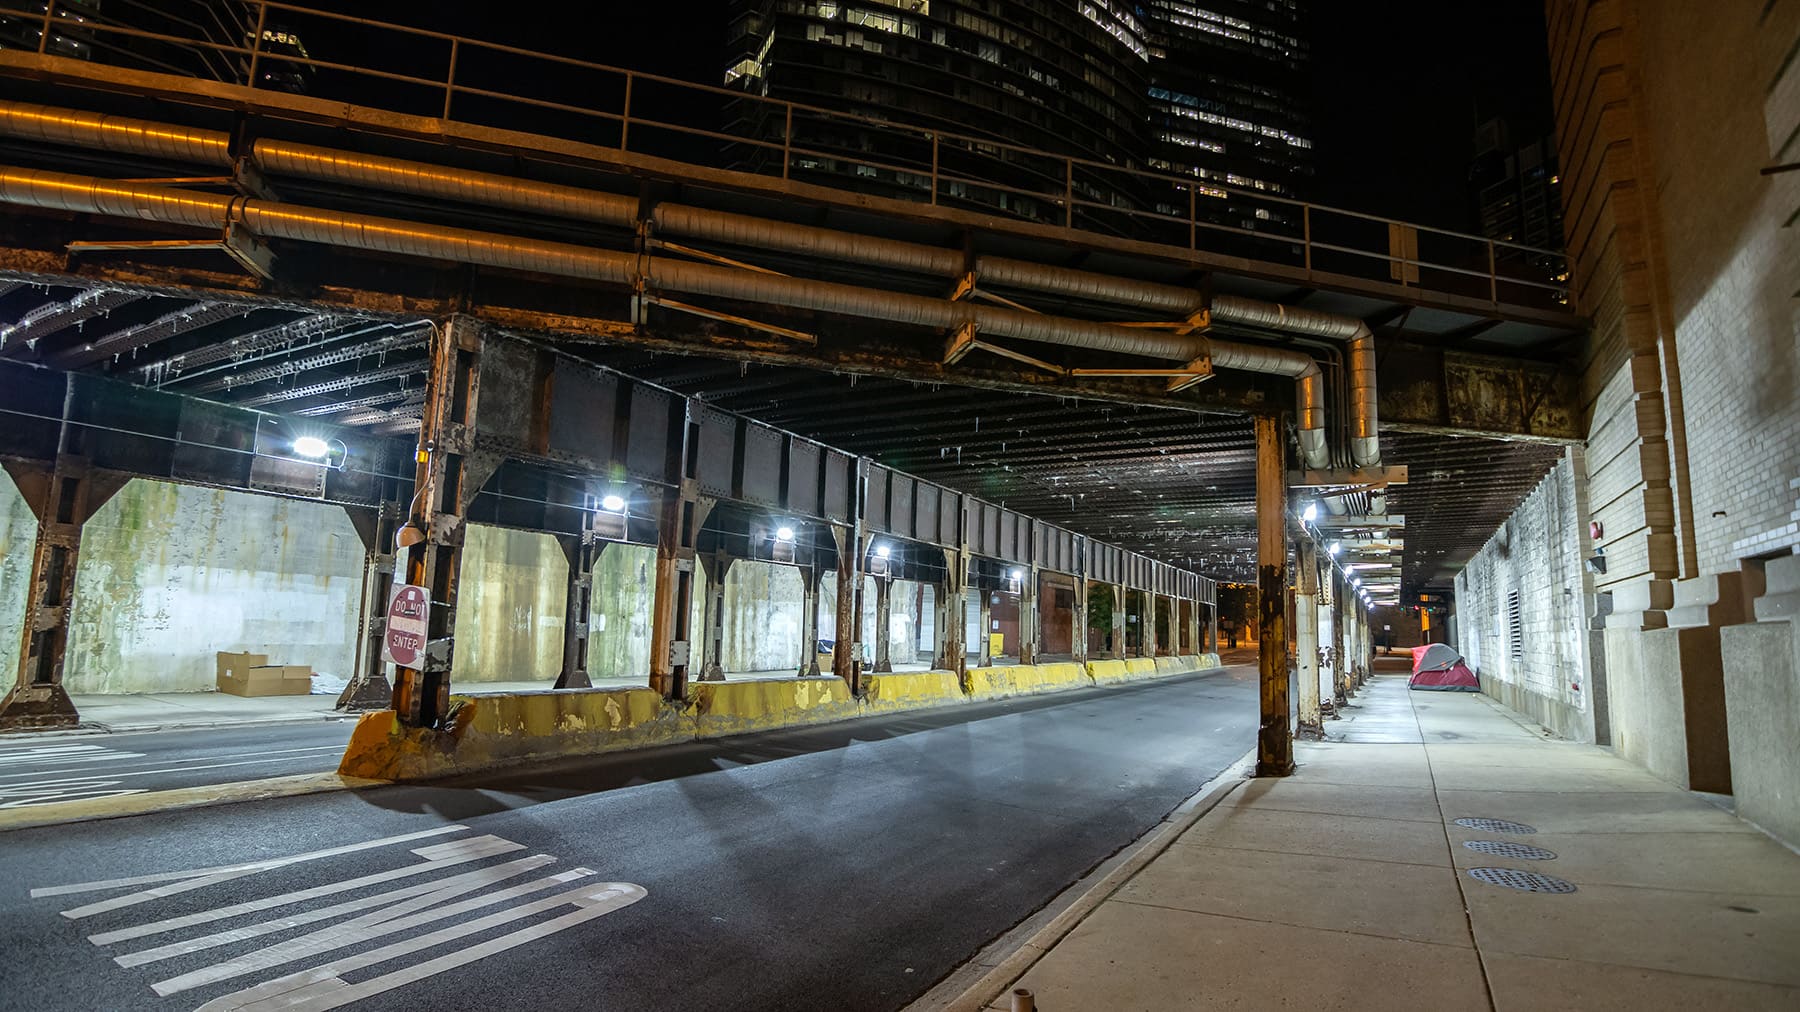 Dark Chicago city alley industrial train bridge underpass with homeless tents and boxes at night